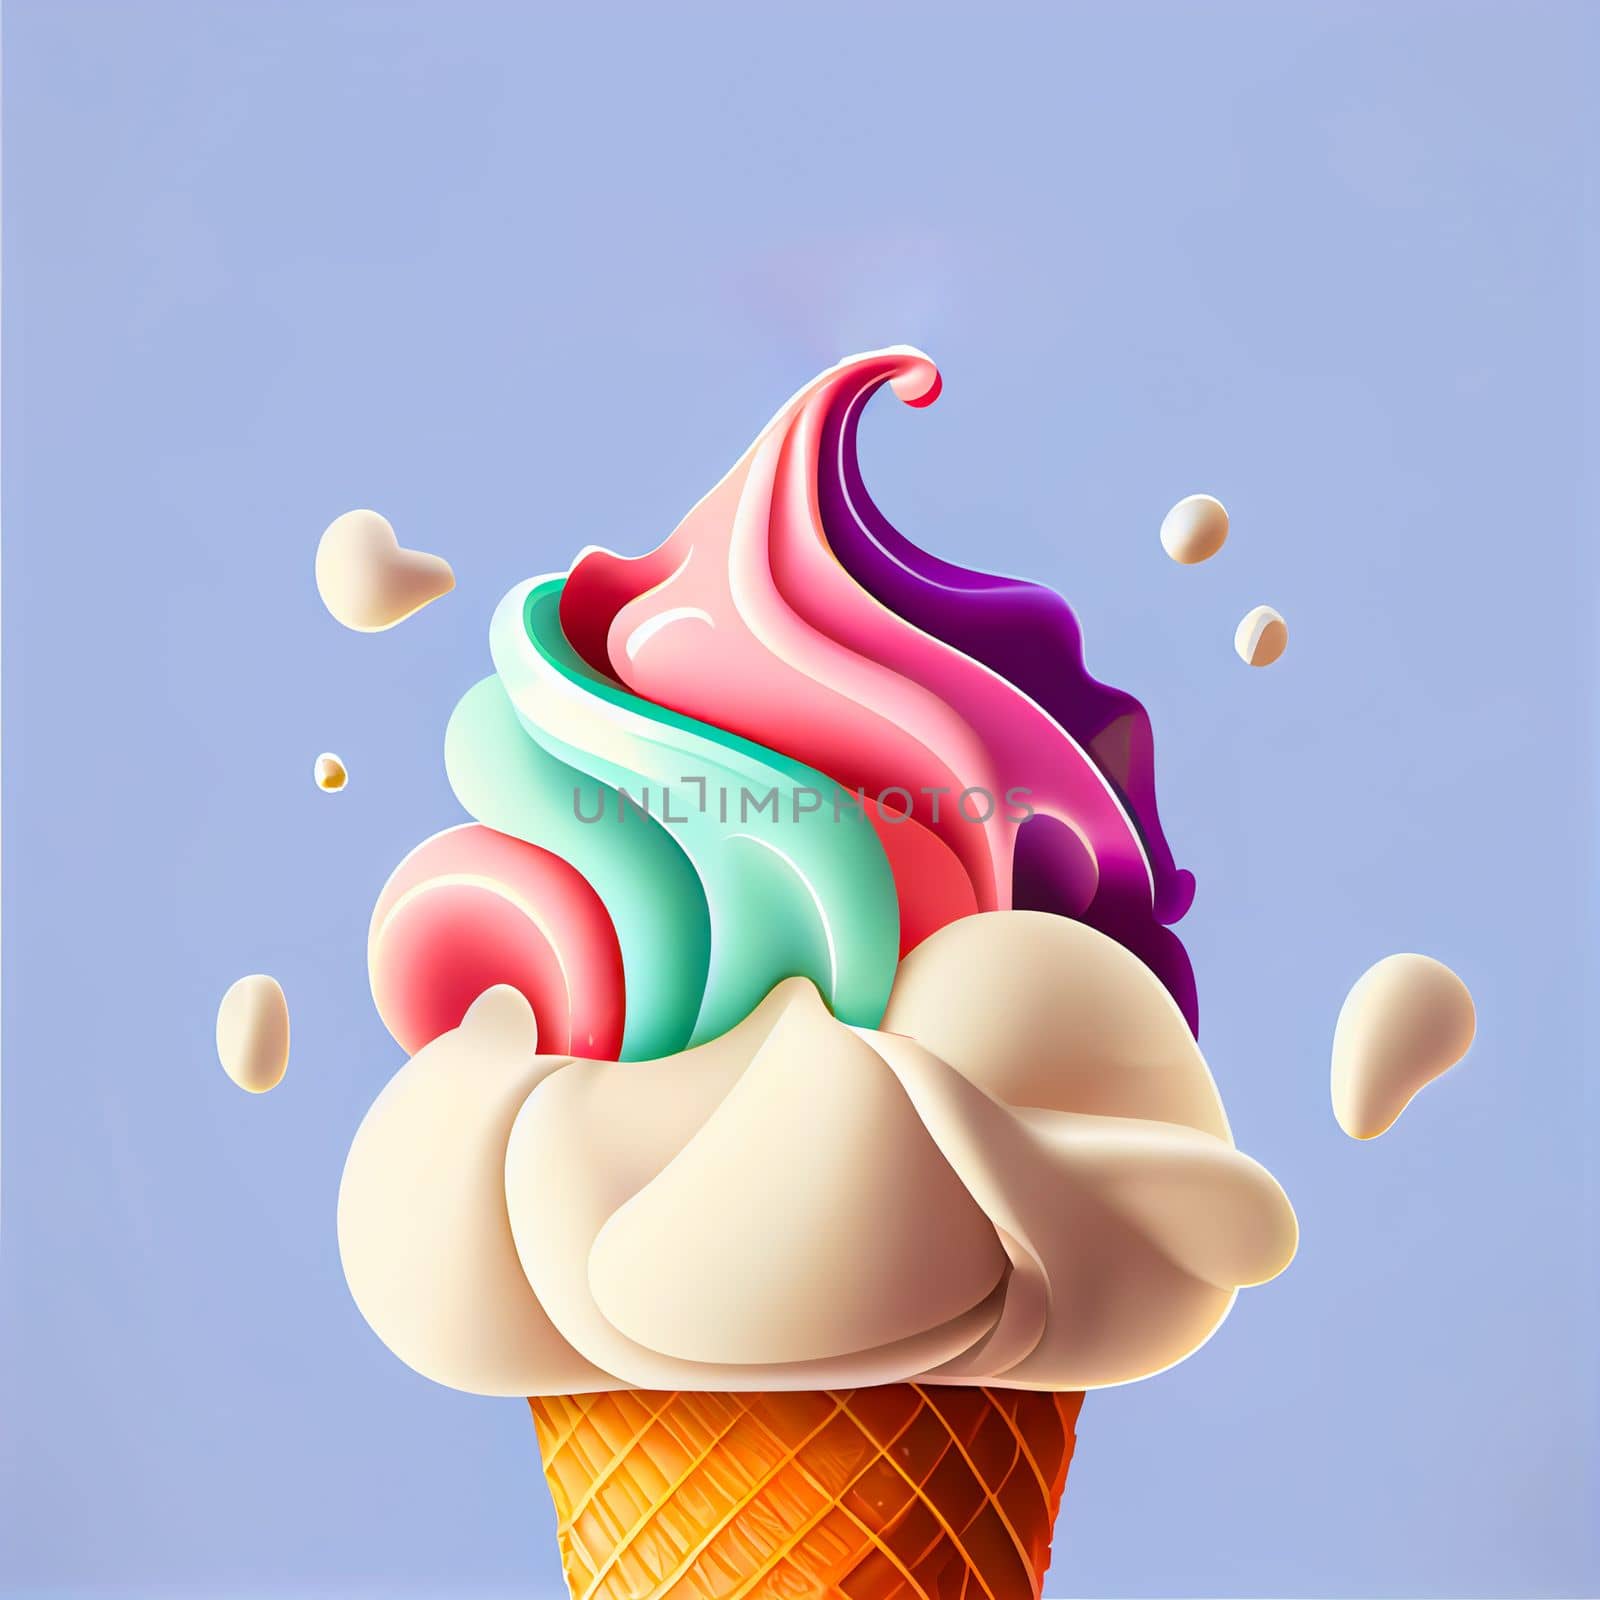 Melting ice cream balls in the waffle cone isolated on background. 3D Illustration flat icon. Comic character in cartoon style illustration for t shirt design.